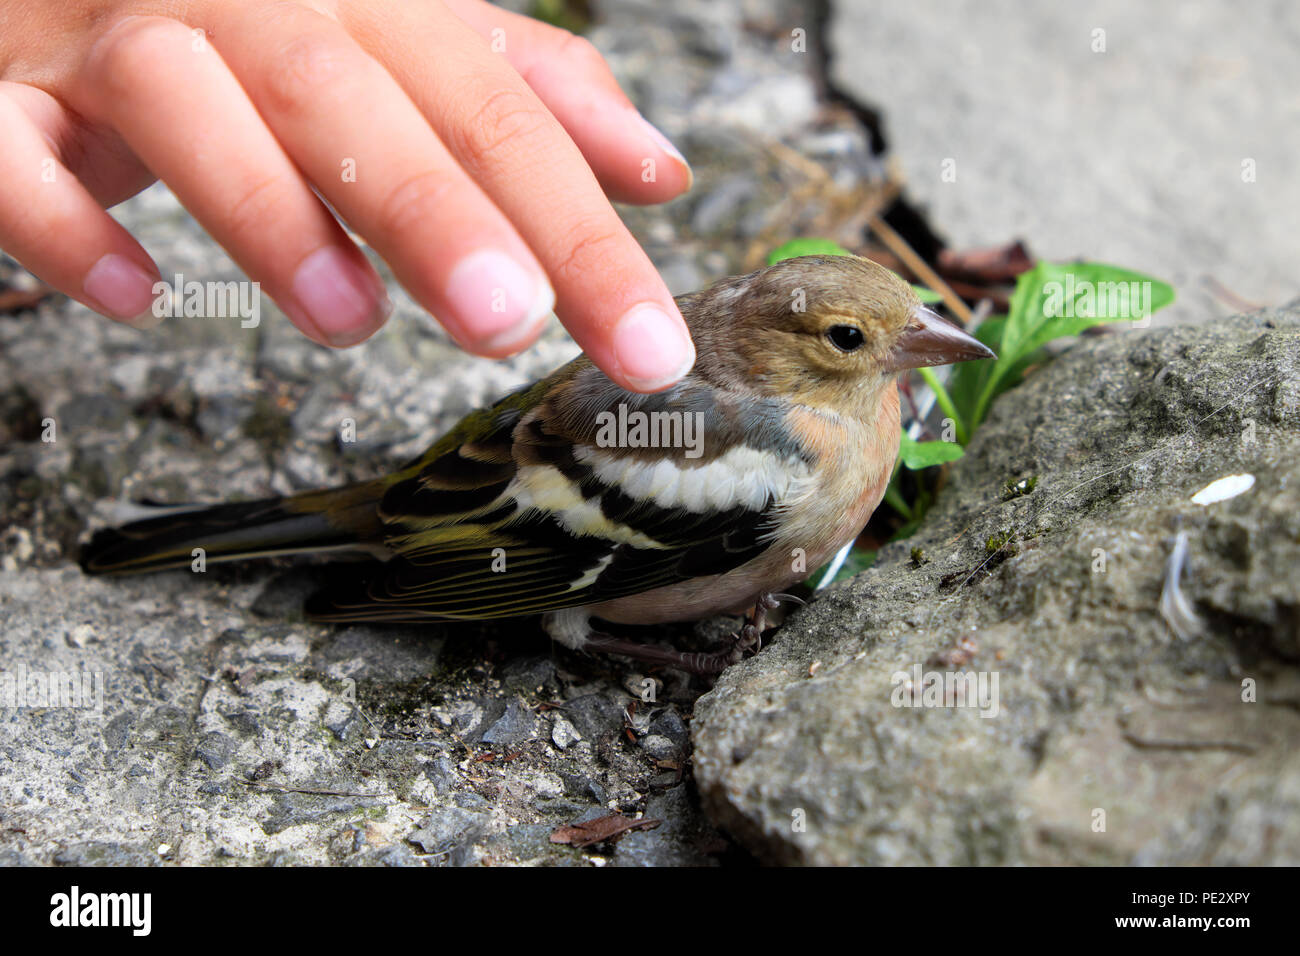 Child showing compassion stroking a chaffinch bird sitting stunned on the ground after crashing into a window Carmarthenshire Wales UK  KATHY DEWITT Stock Photo